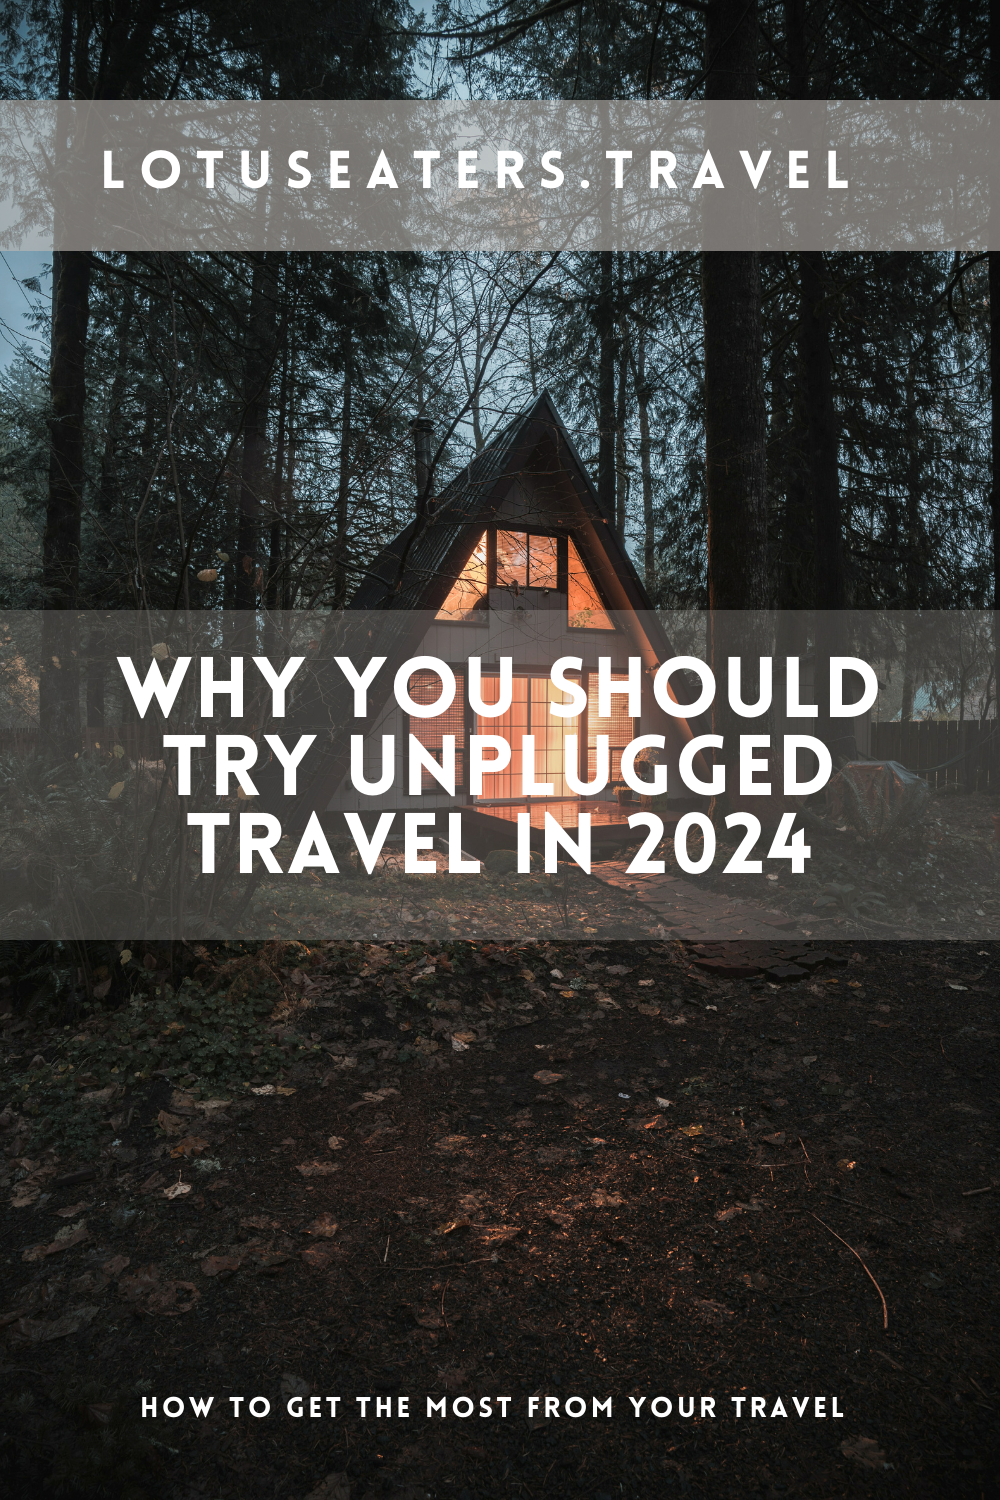 cabin in woods - why you should try unplugged travel in 2024